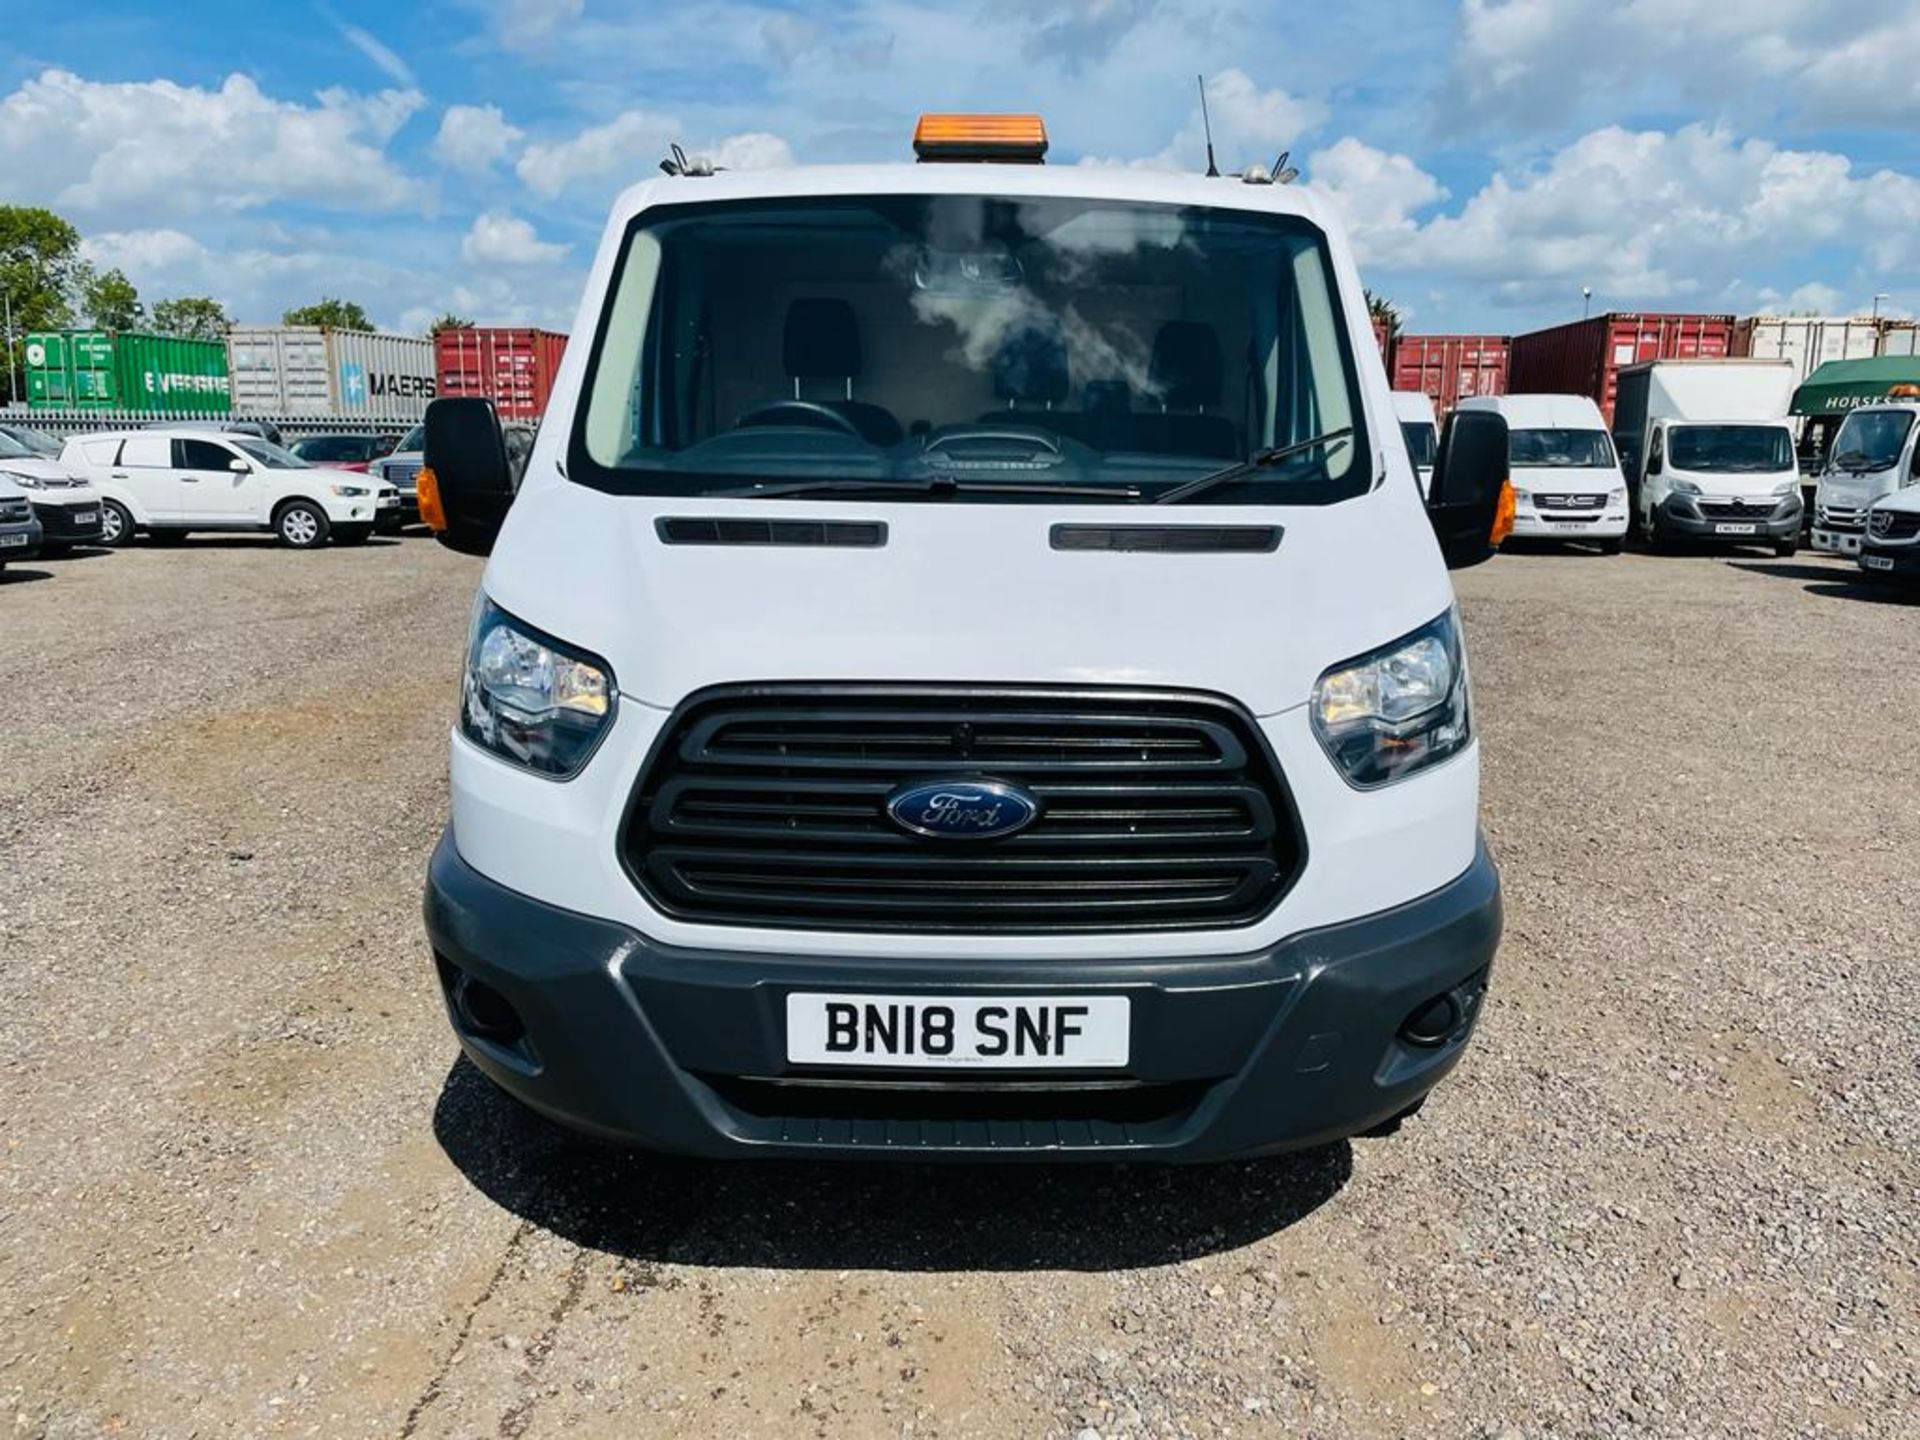 ** ON SALE **Ford Transit 2.0 TDCI 130 Double Cab Tipper 2018 '18 Reg' Euro 6 - ULEZ Compliant - Image 2 of 28